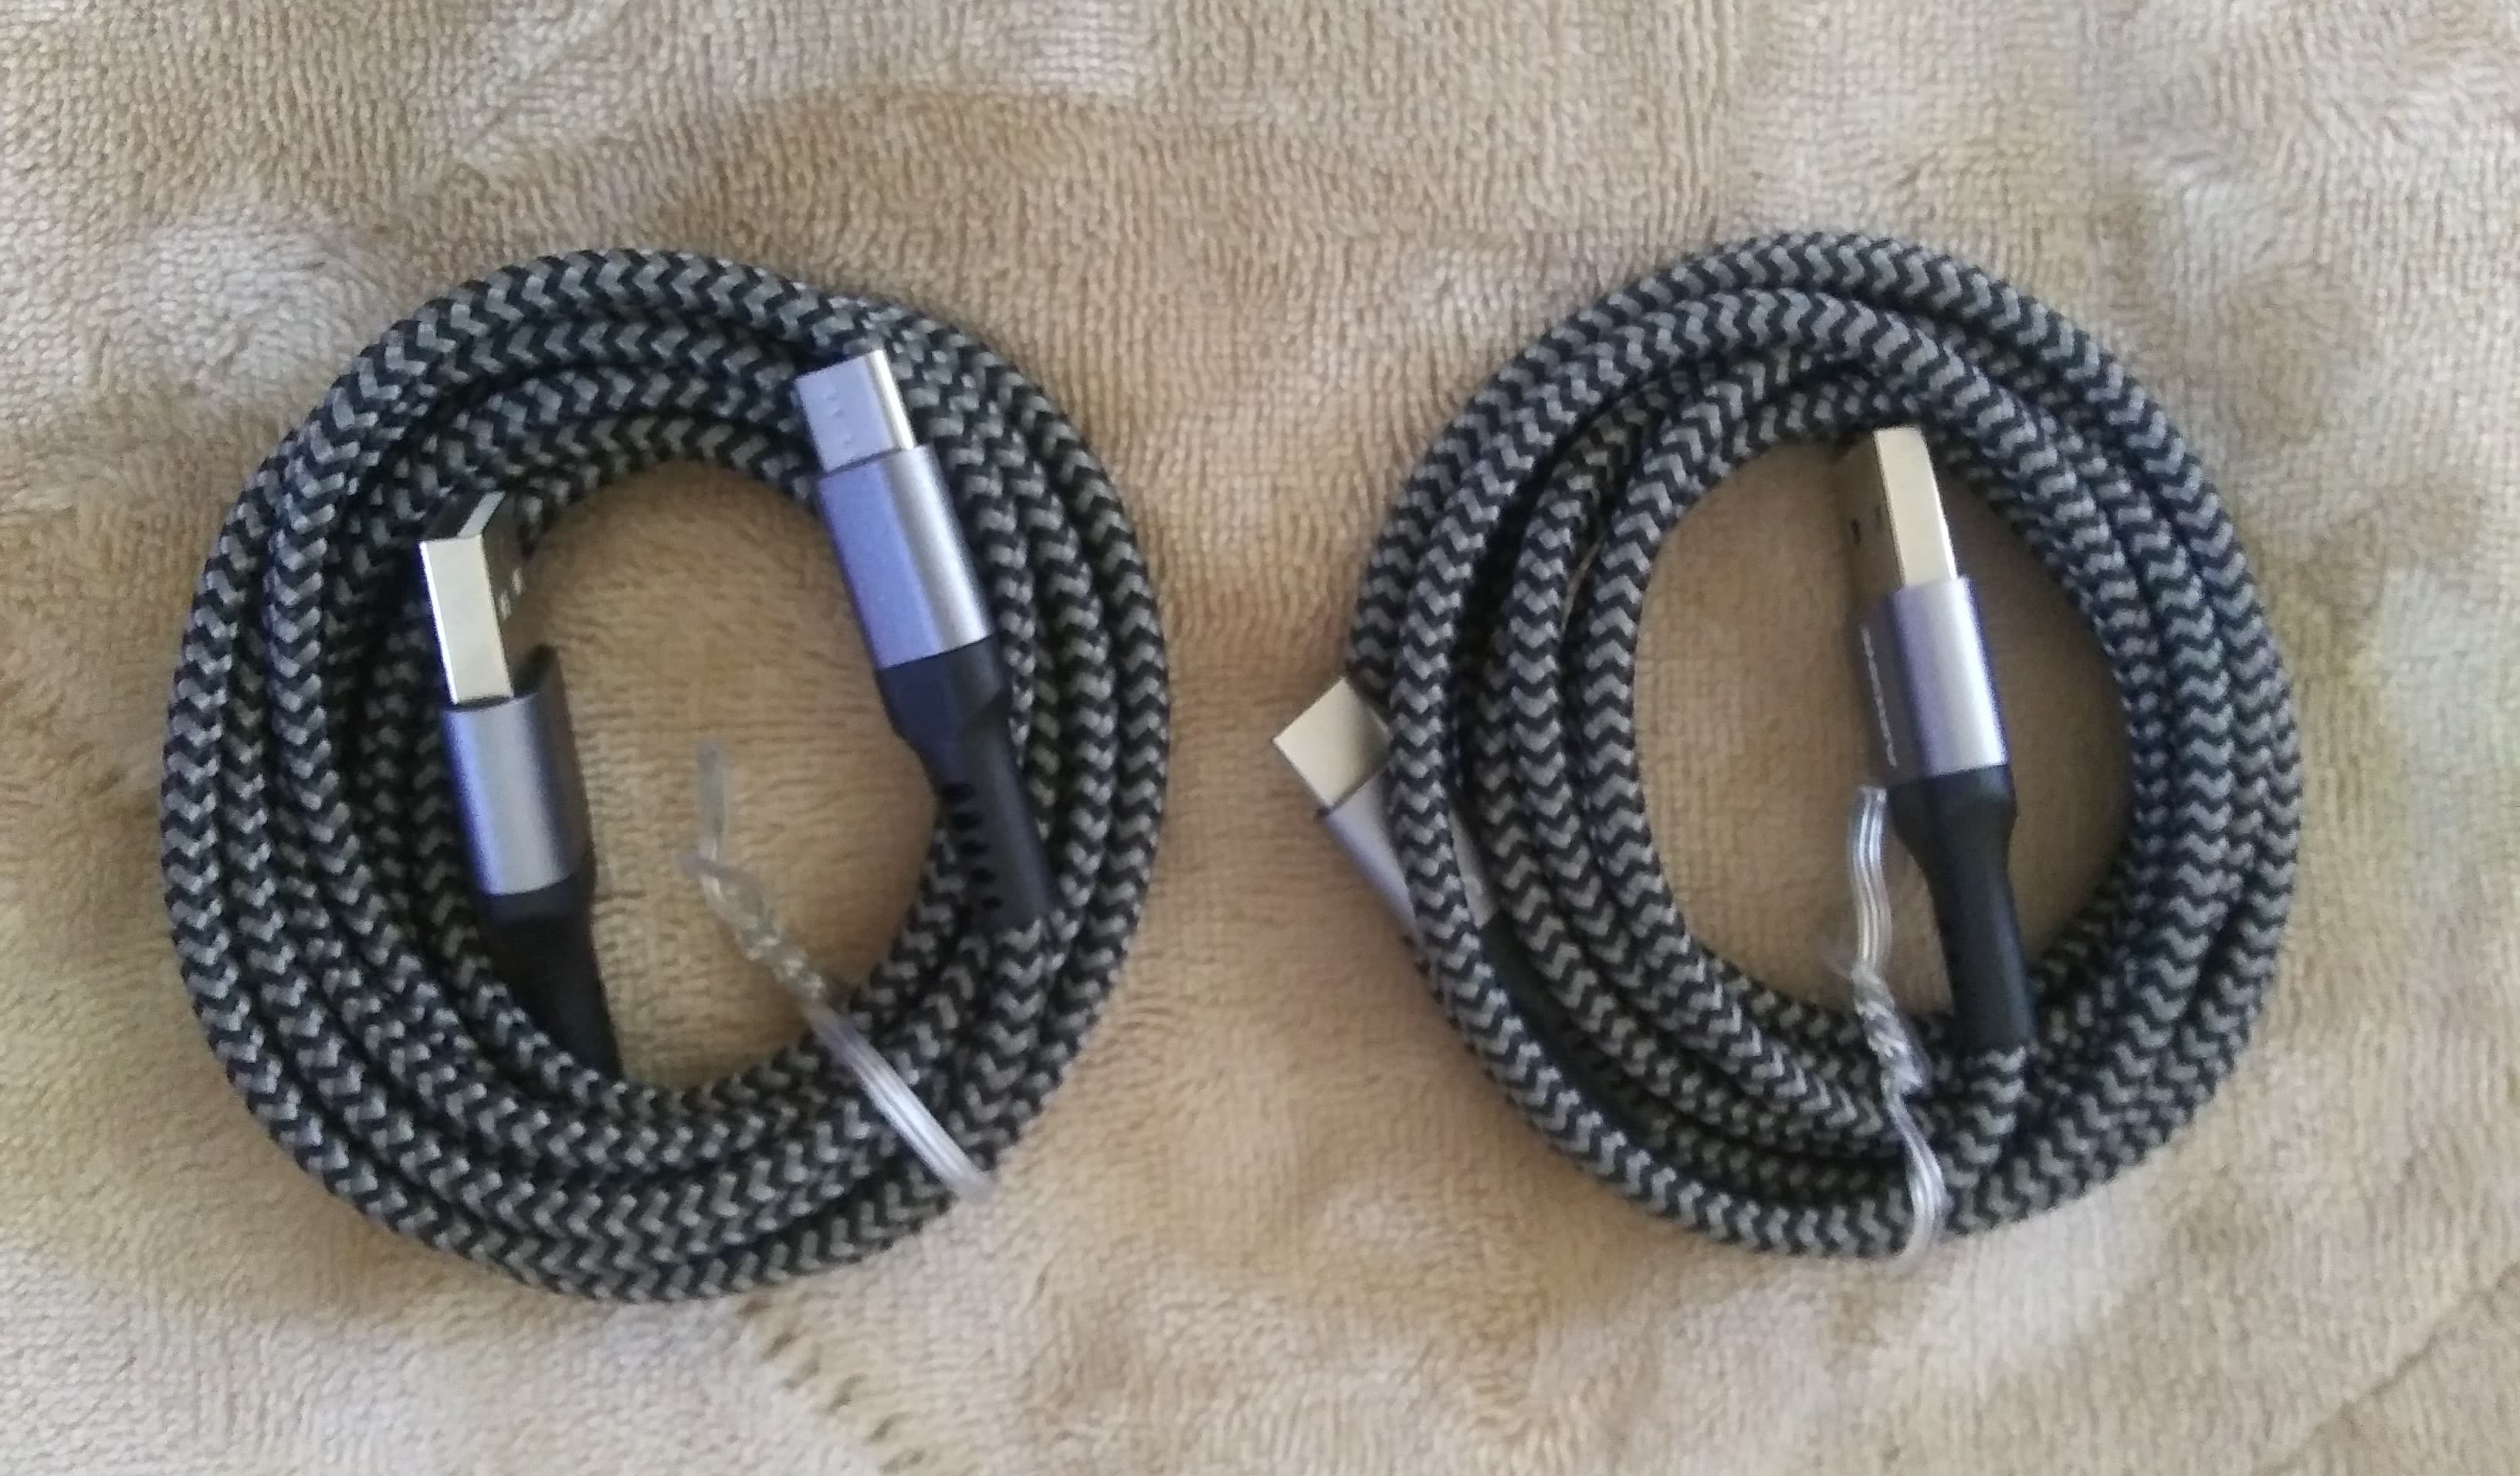 Type-C cables 2 pack